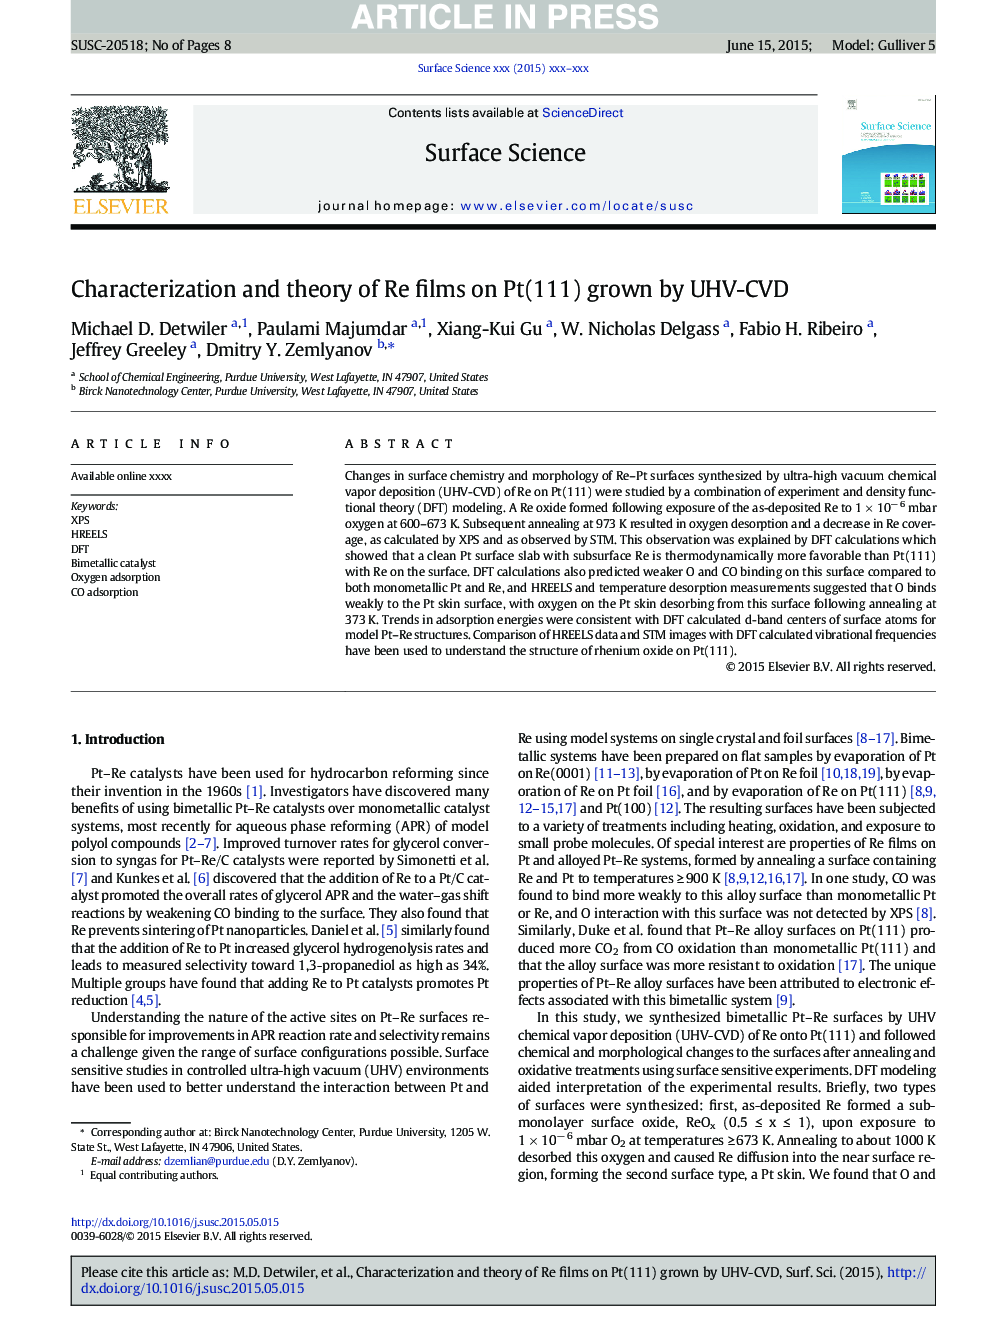 Characterization and theory of Re films on Pt(111) grown by UHV-CVD